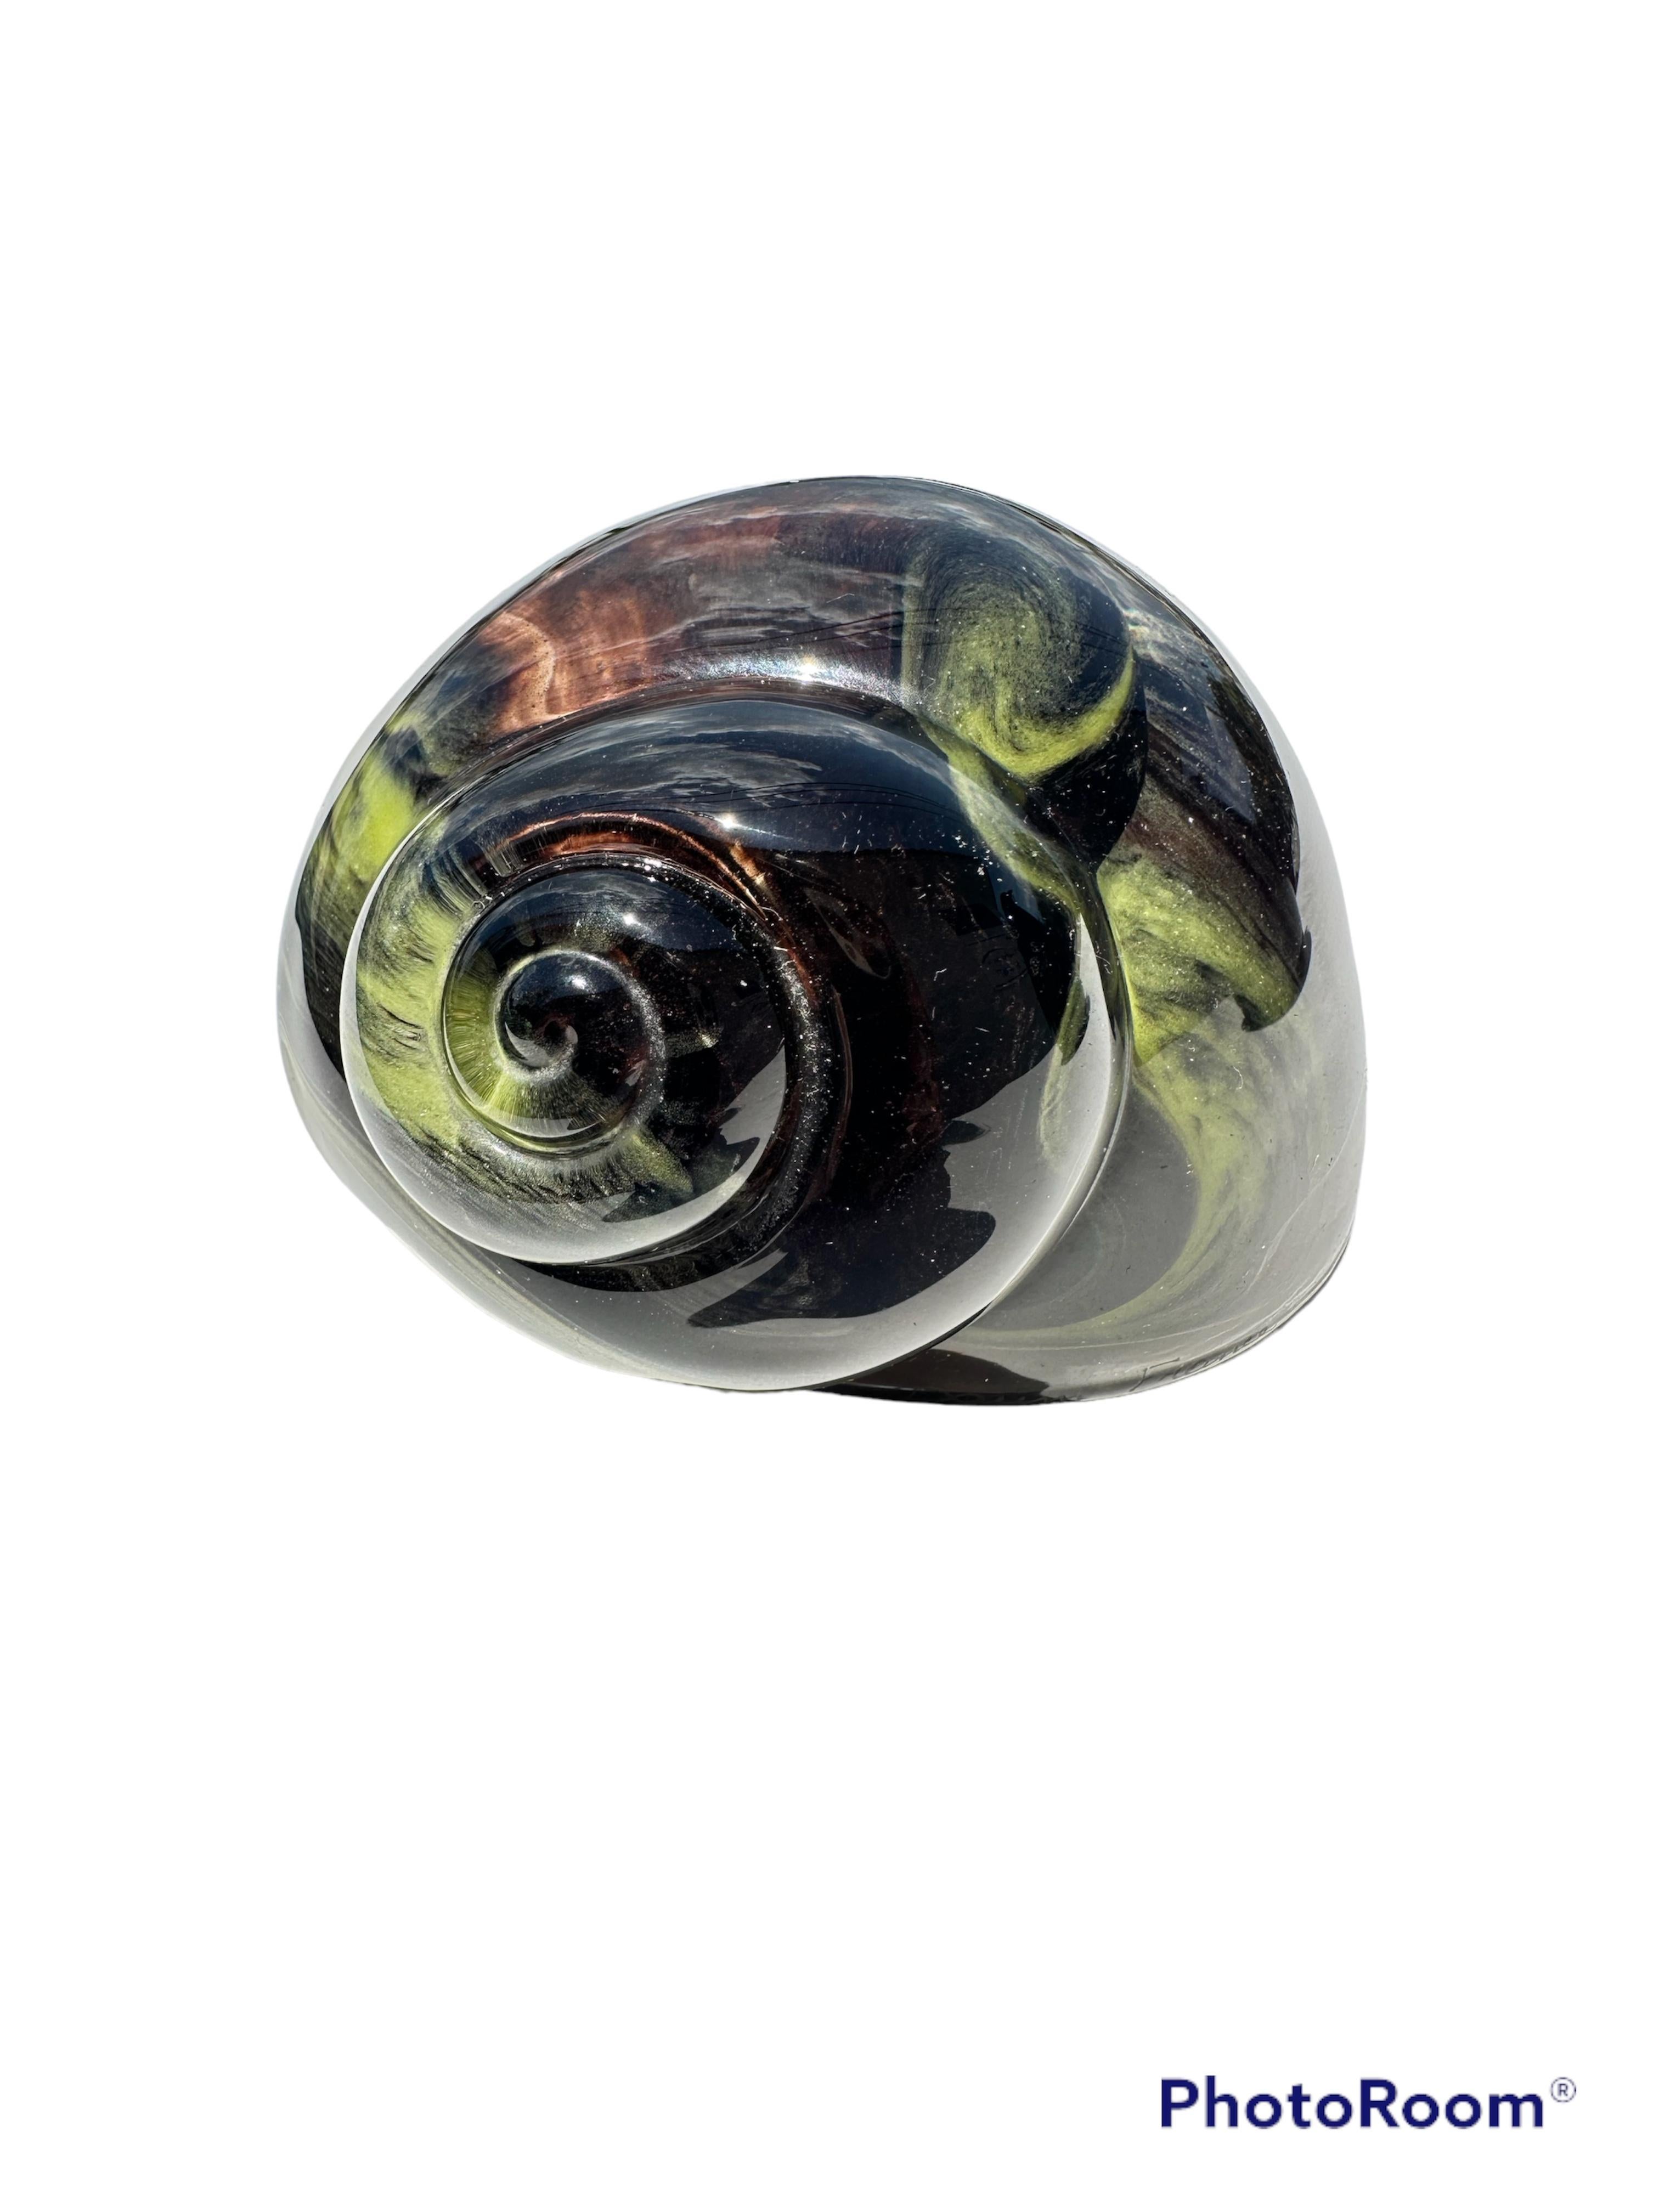 Beautiful shape and the green coloring is swirled beautifully through-out. VTG Glass Escargot Paperweight attributed to Daum.